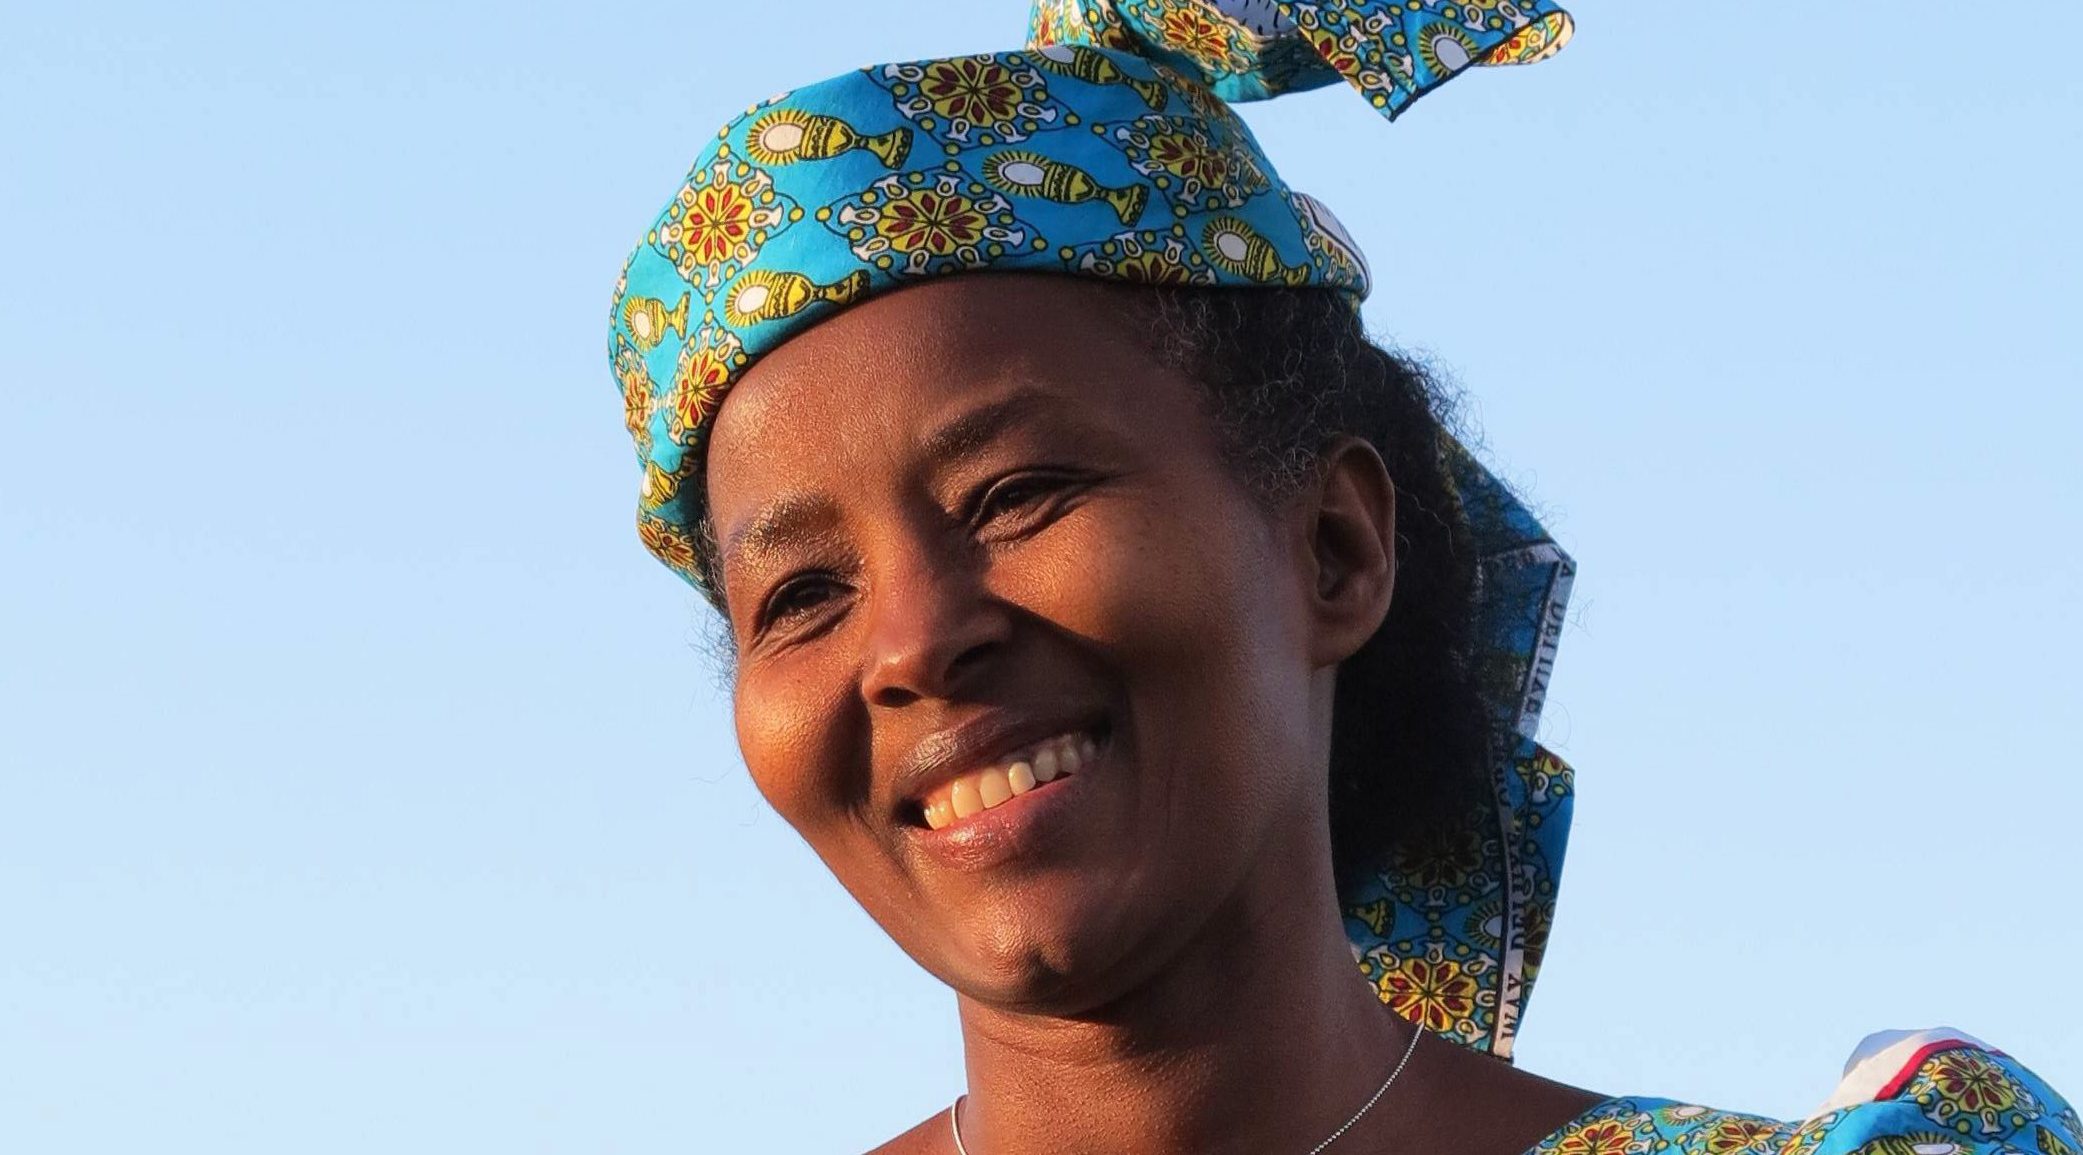 Denise Uwimana gave birth during the Rwanda Genocide which killed nearly 1 million people